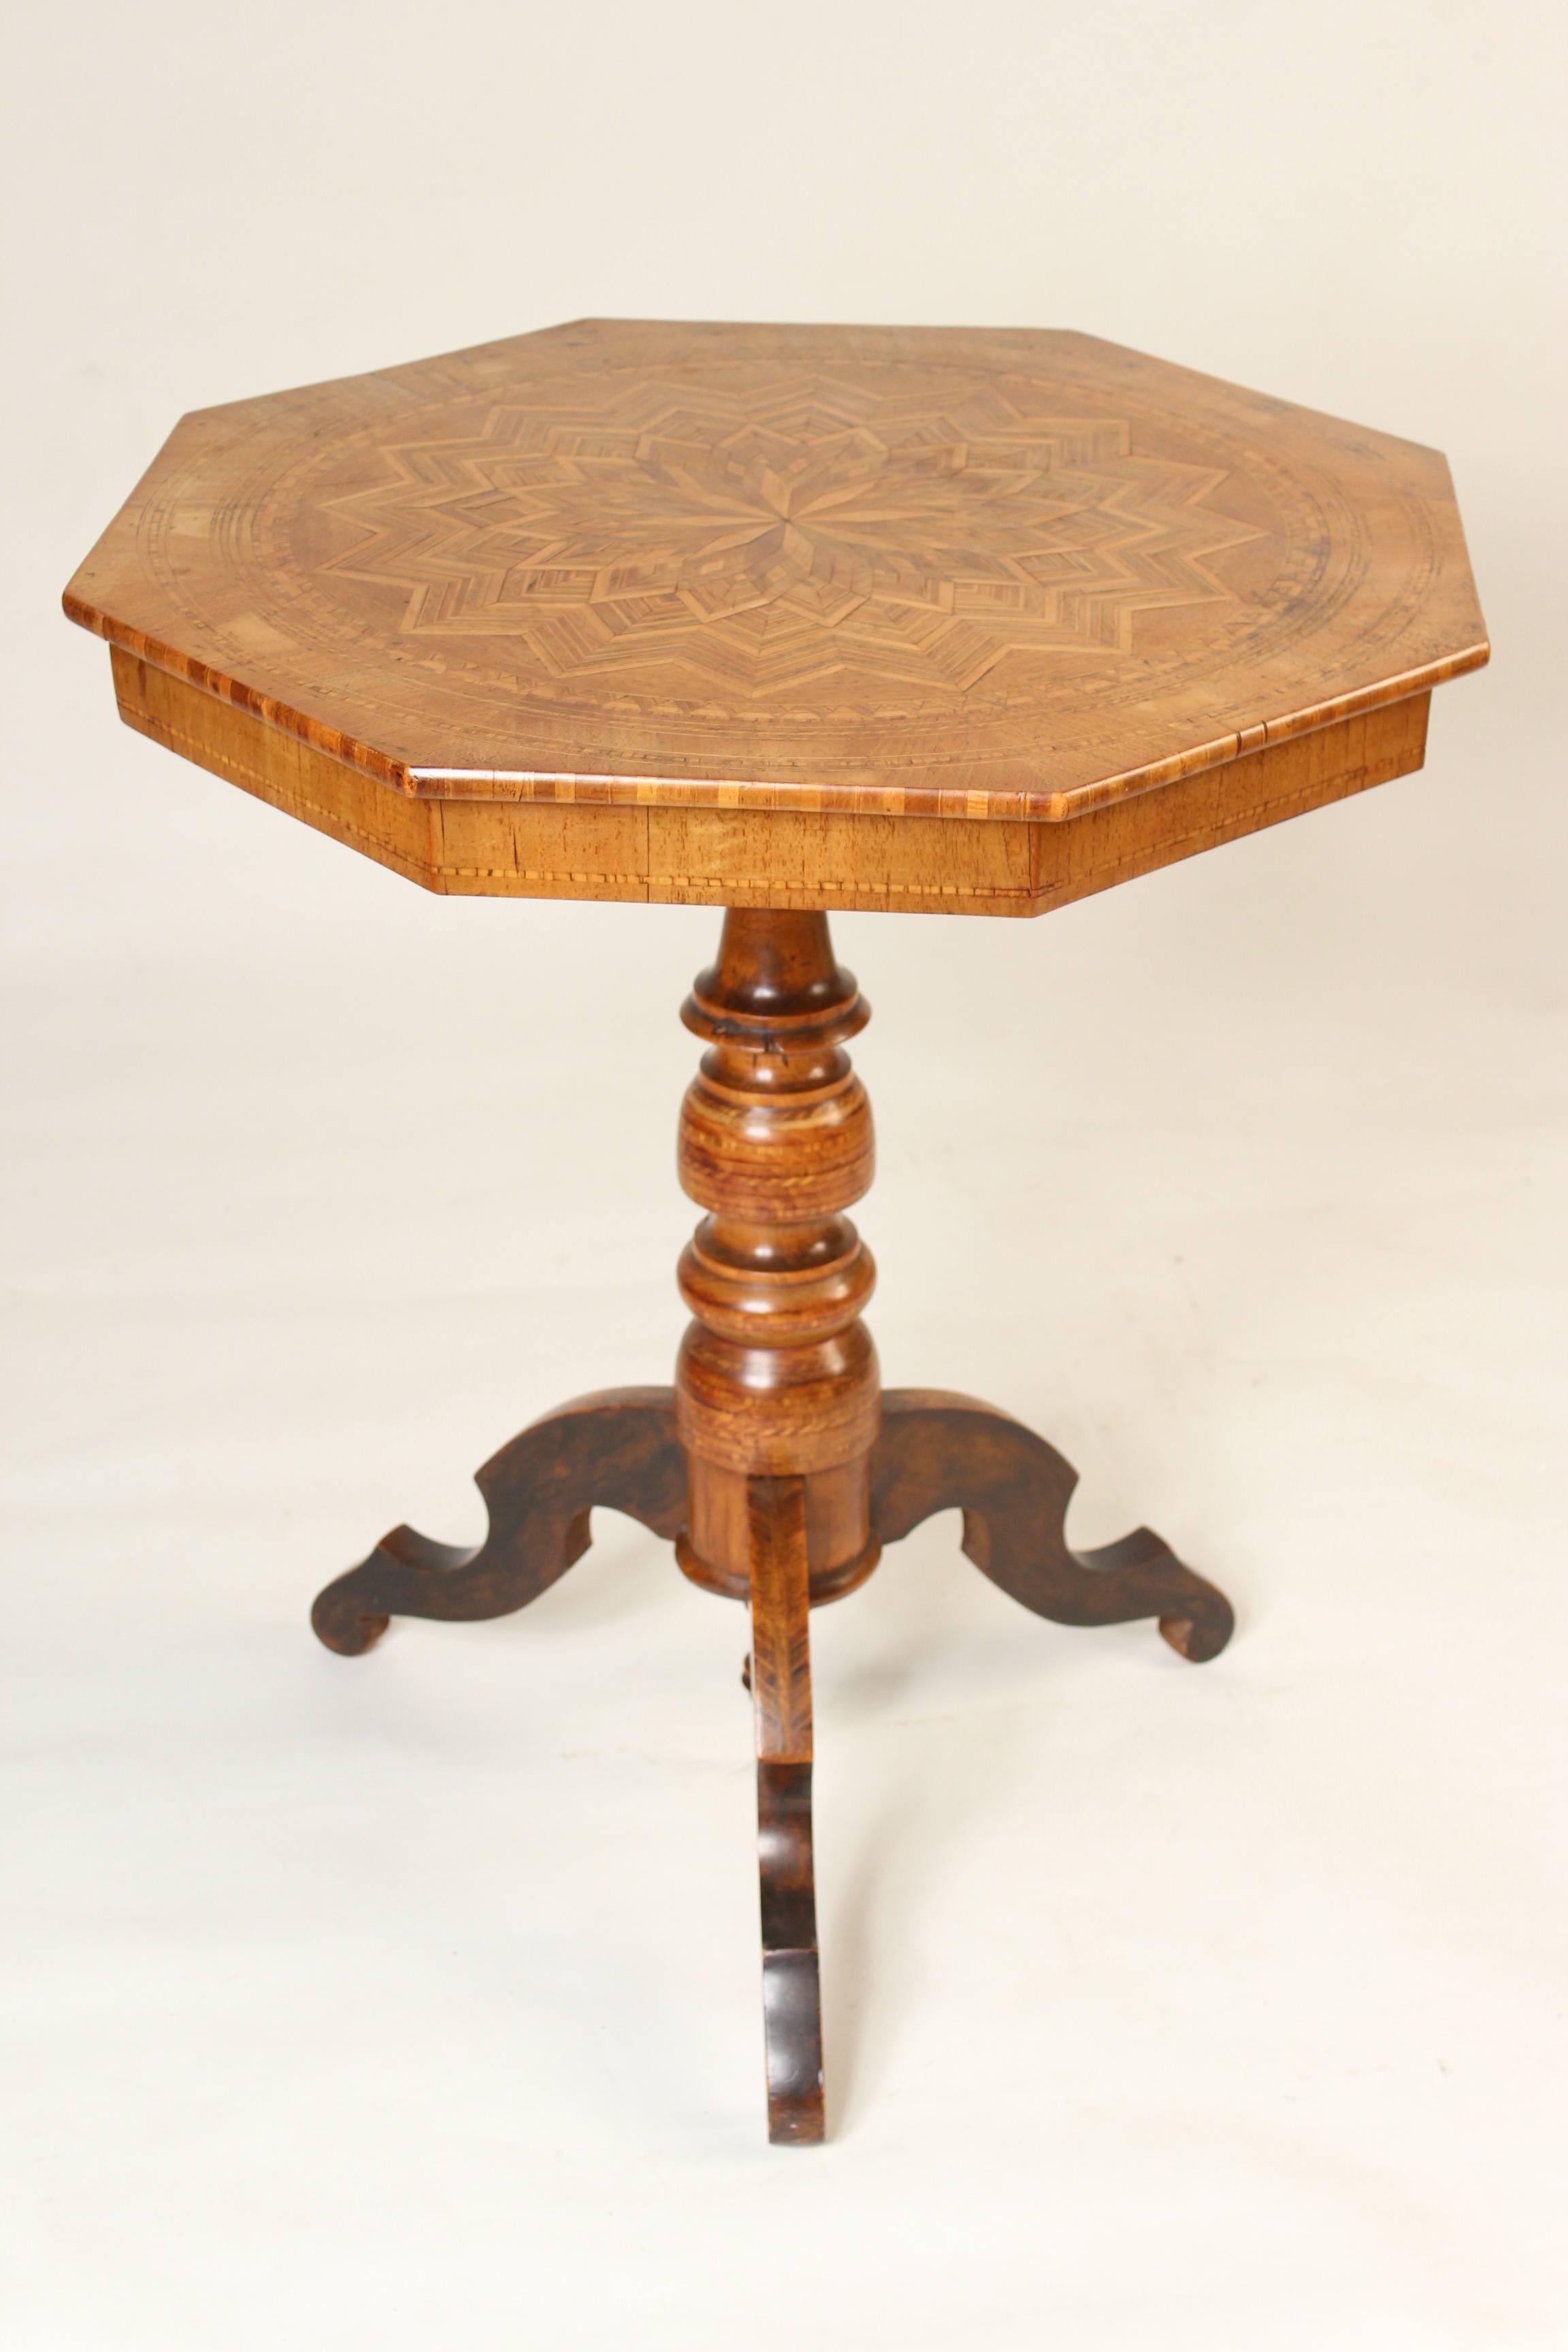 Italian inlaid octagonal pedestal occasional table, circa 1930-1950. Very fine quality inlay on the top, pedestal and feet.